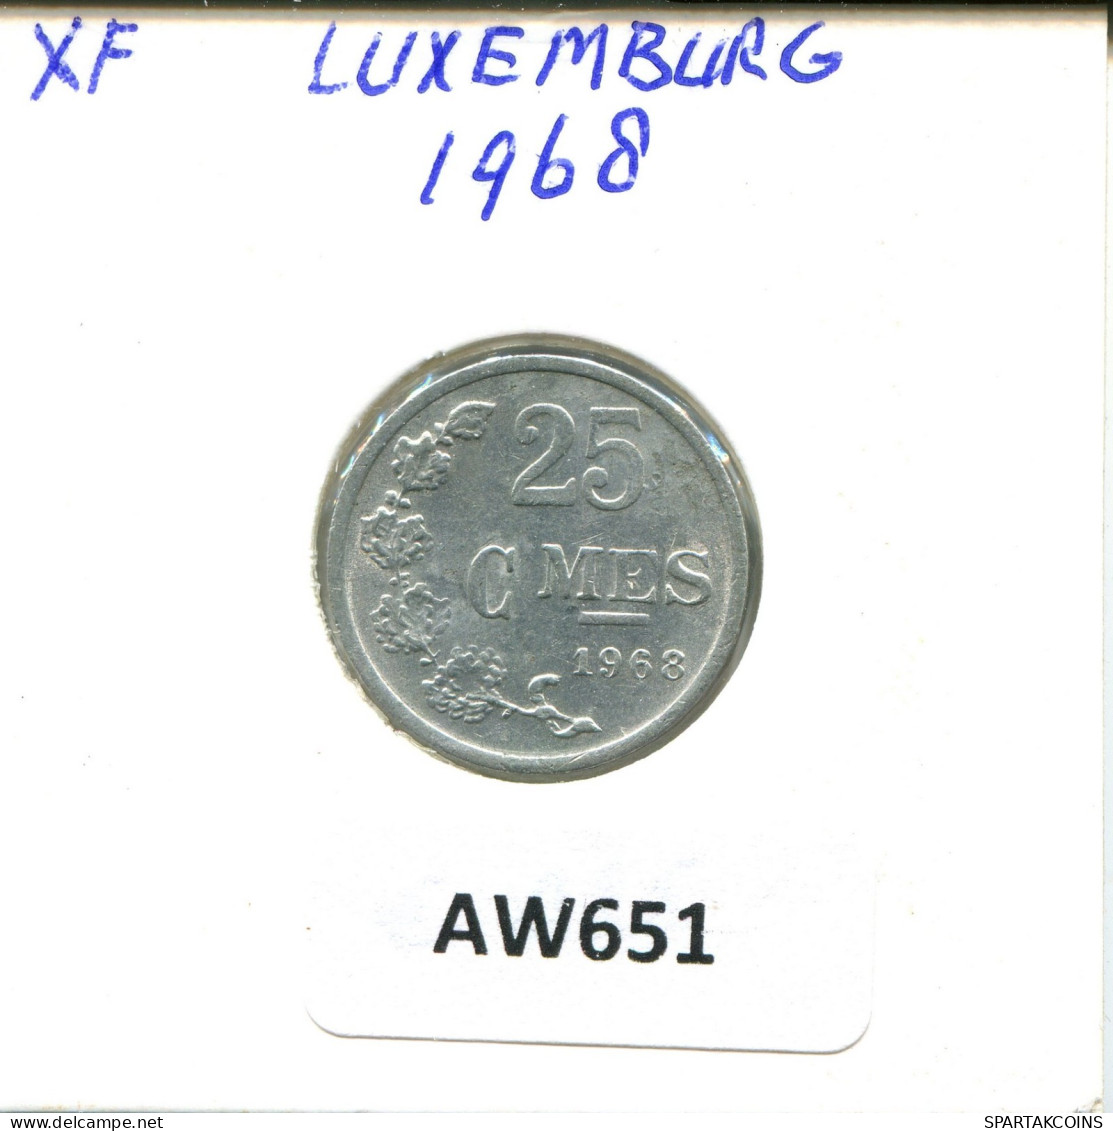 25 CENTIMES 1968 LUXEMBURG LUXEMBOURG Münze #AW651.D.A - Lussemburgo